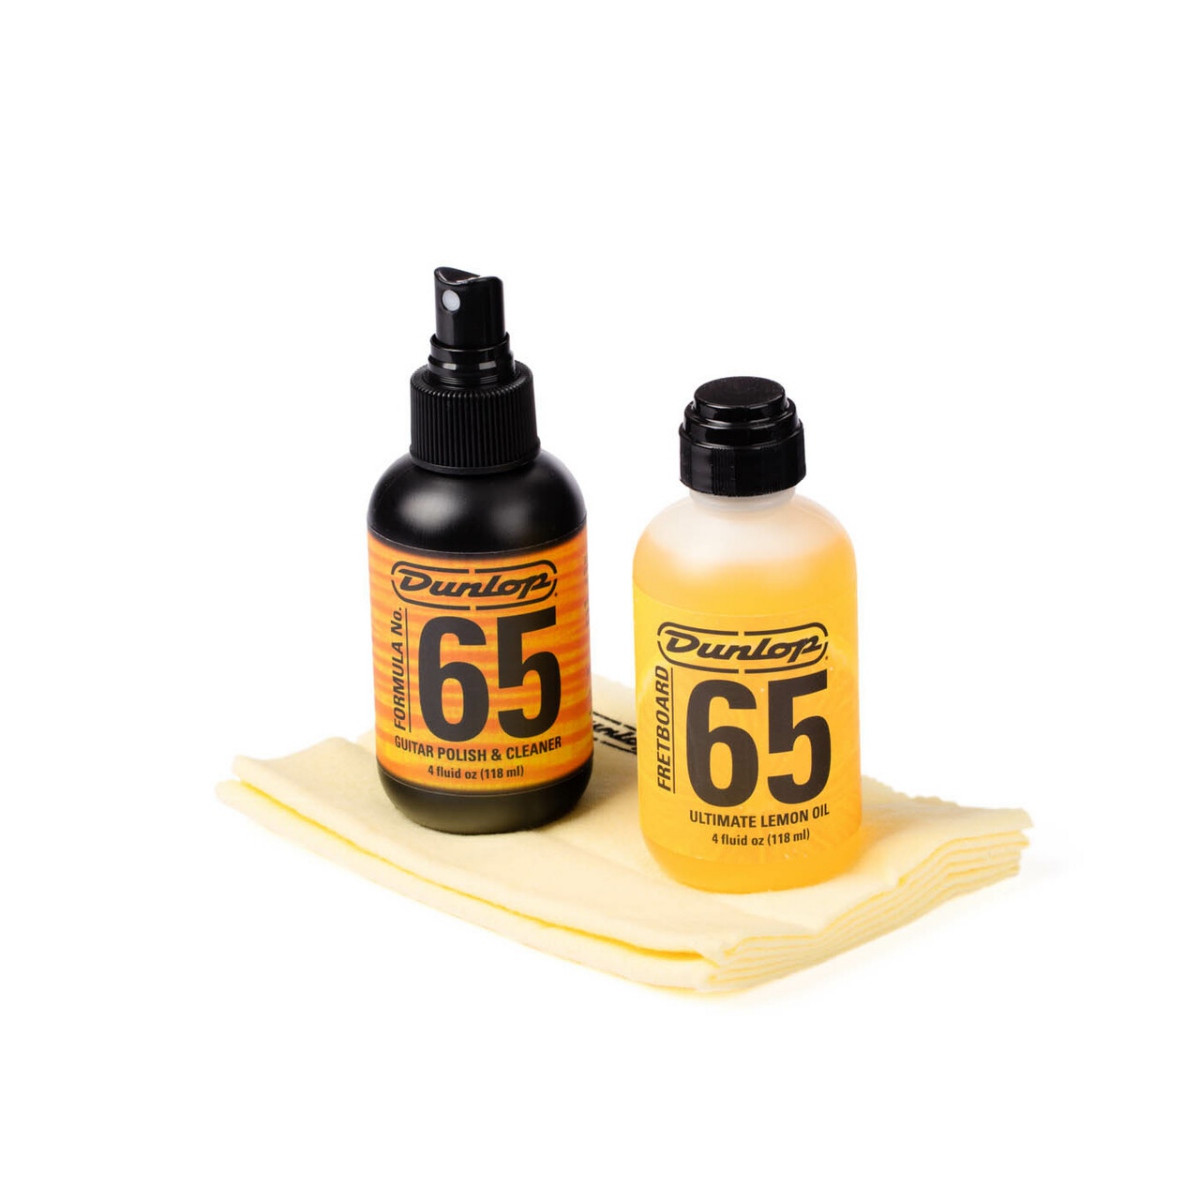 An image of Dunlop Body & Fingerboard Care Kit - Gift for a Guitarist | PMT Online